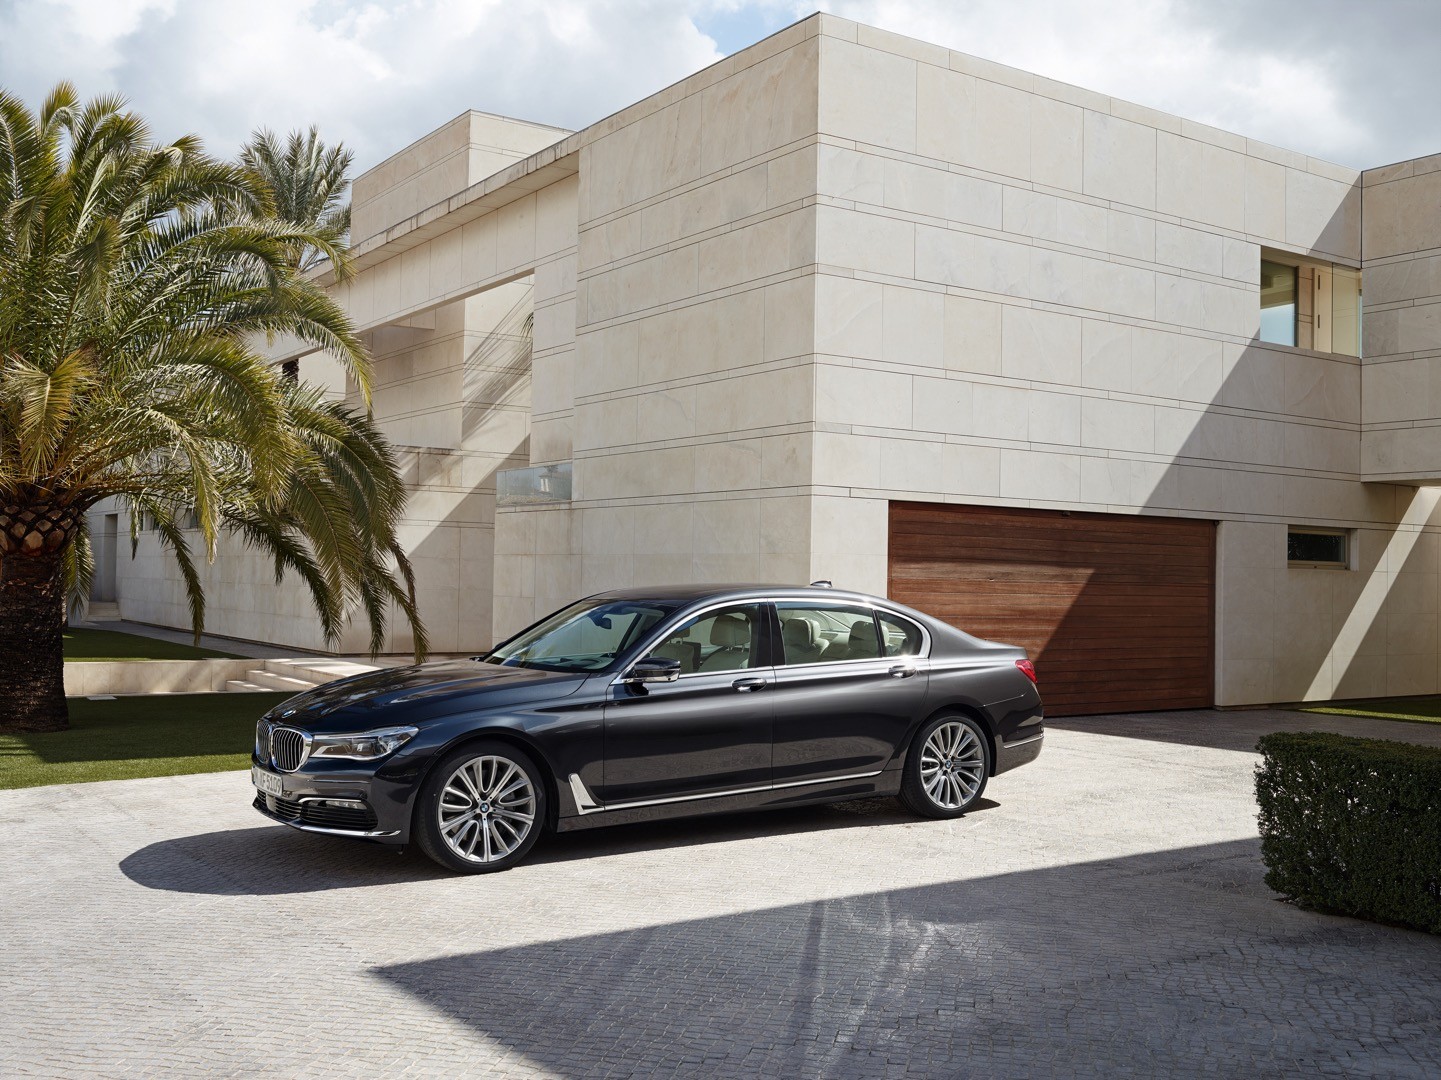 2016-bmw-7-series-finally-officially-unveiled-the-good-stuffs-inside-photo-gallery_24